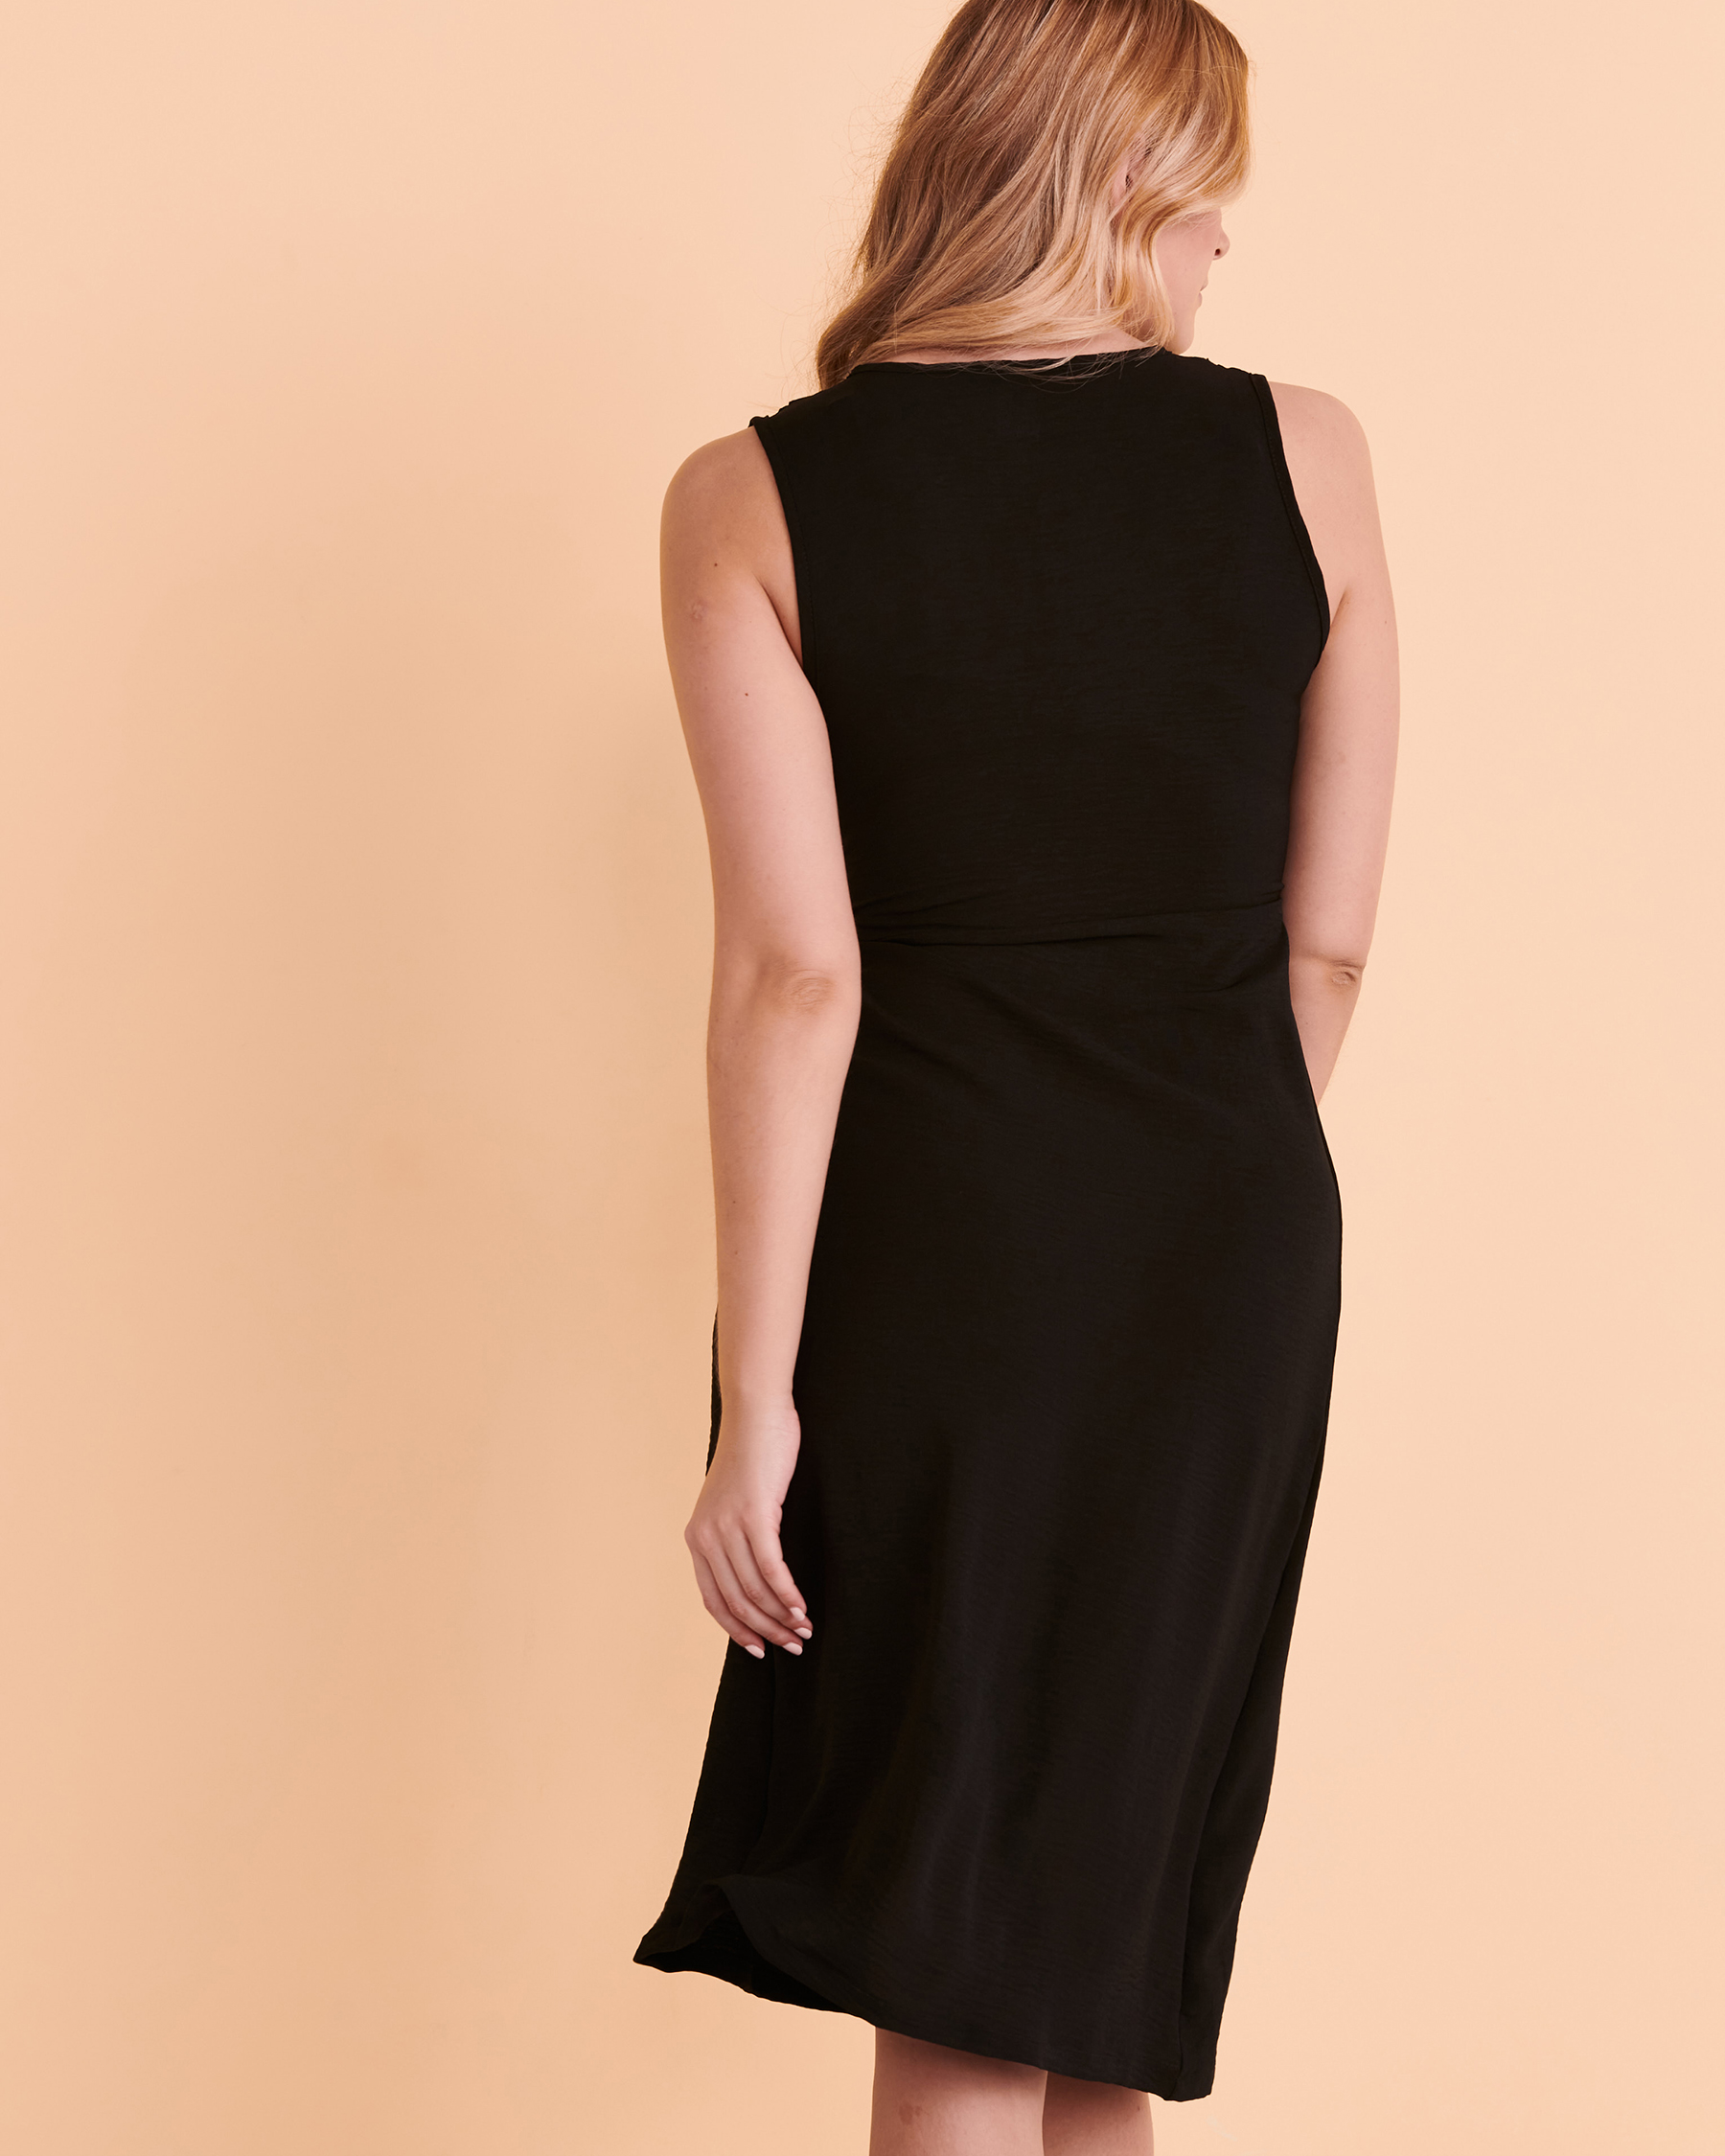 COVER ME Sleeveless Knotted Dress Black 23052557 - View2